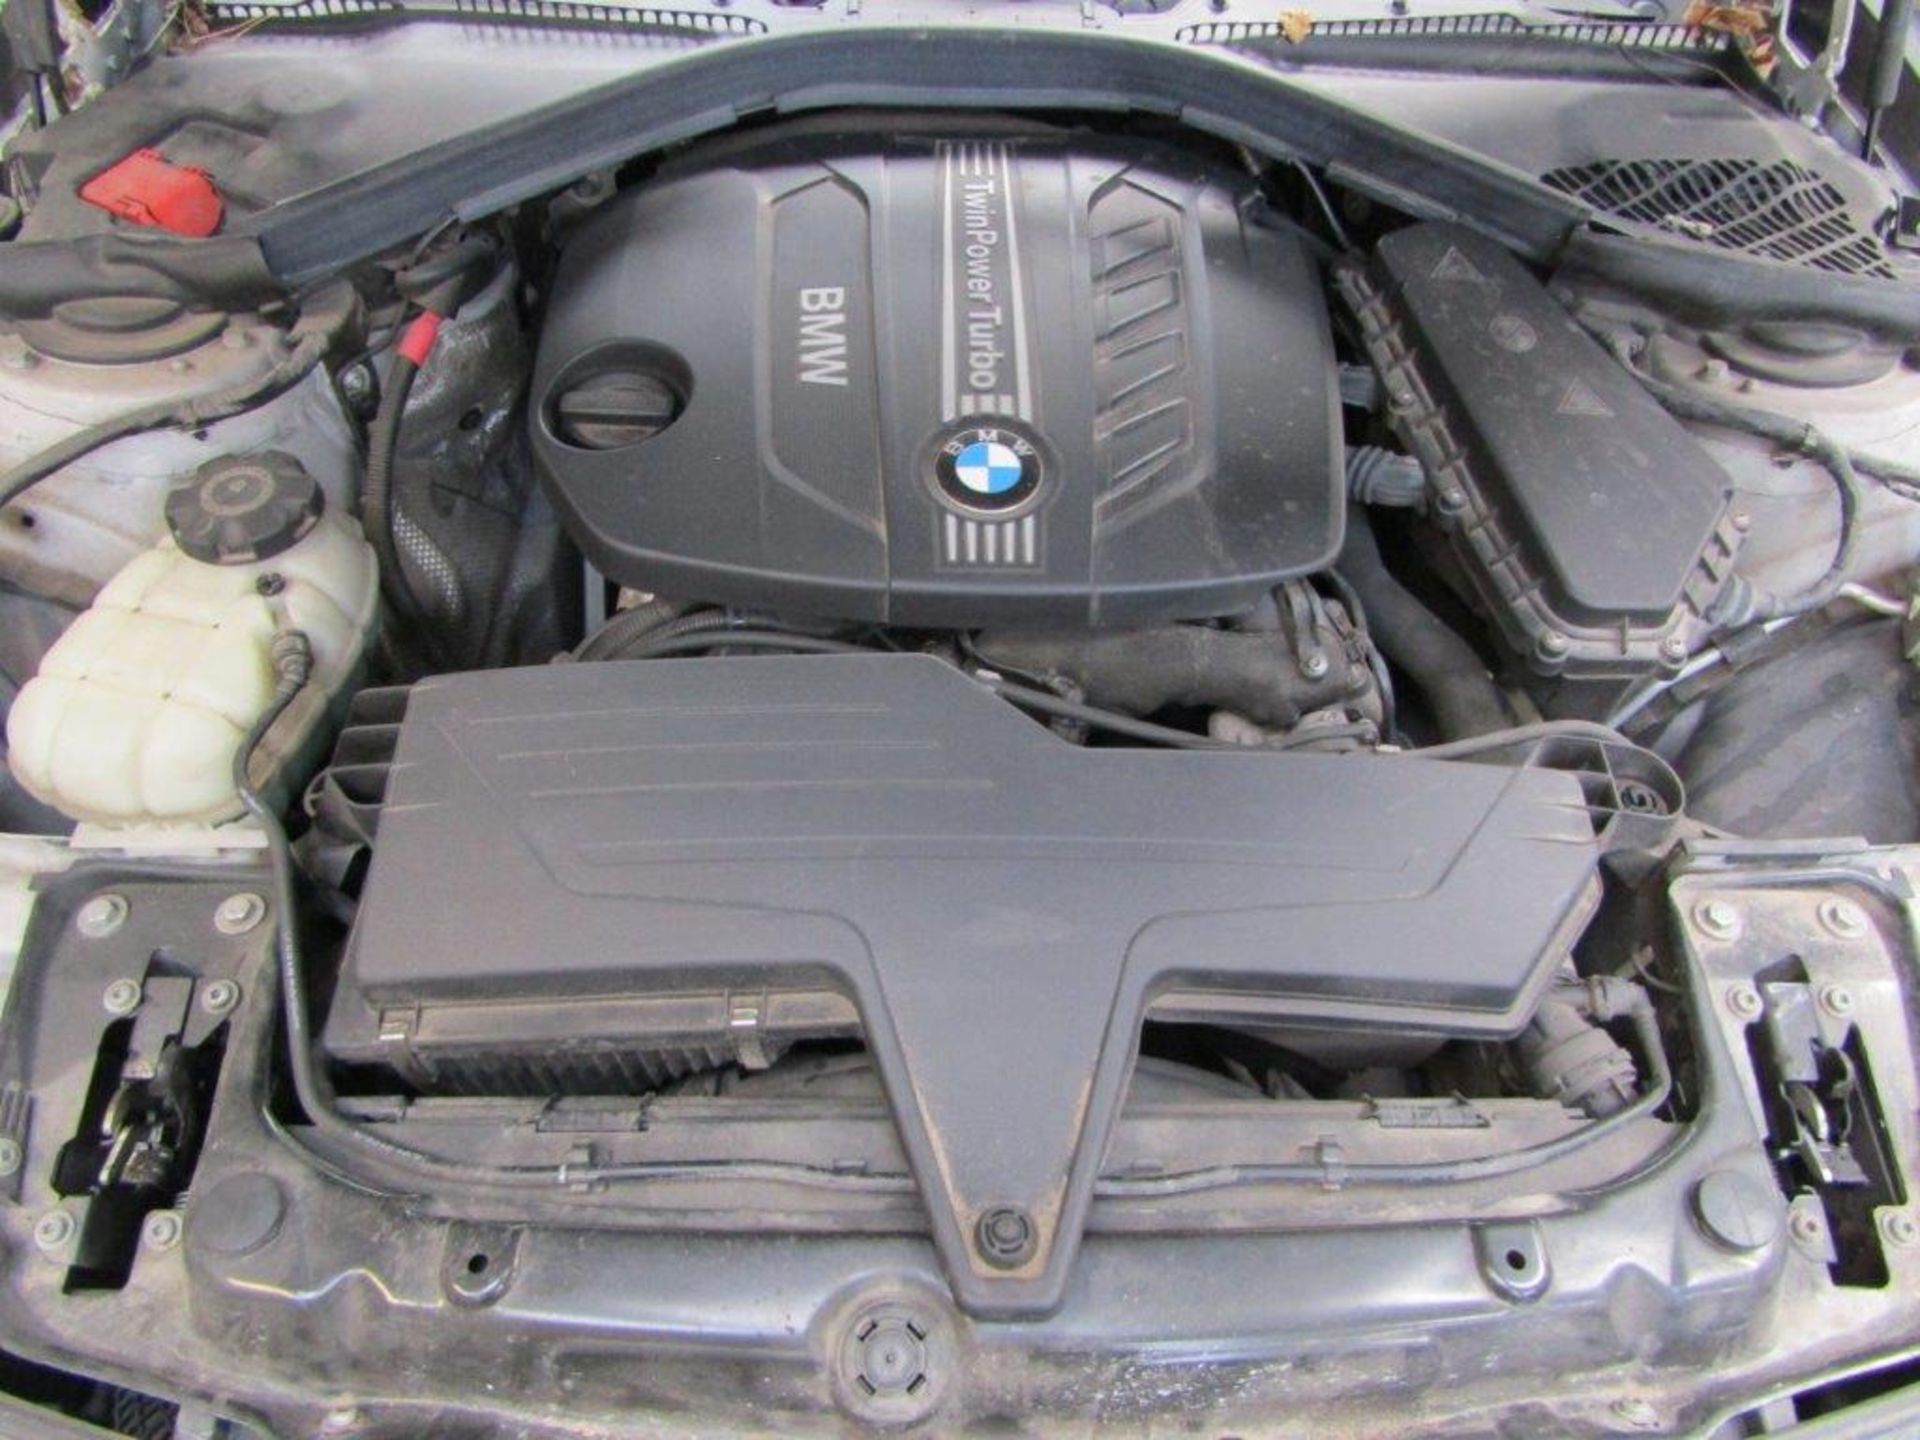 62 12 BMW 320D Sport Touring - Image 5 of 29